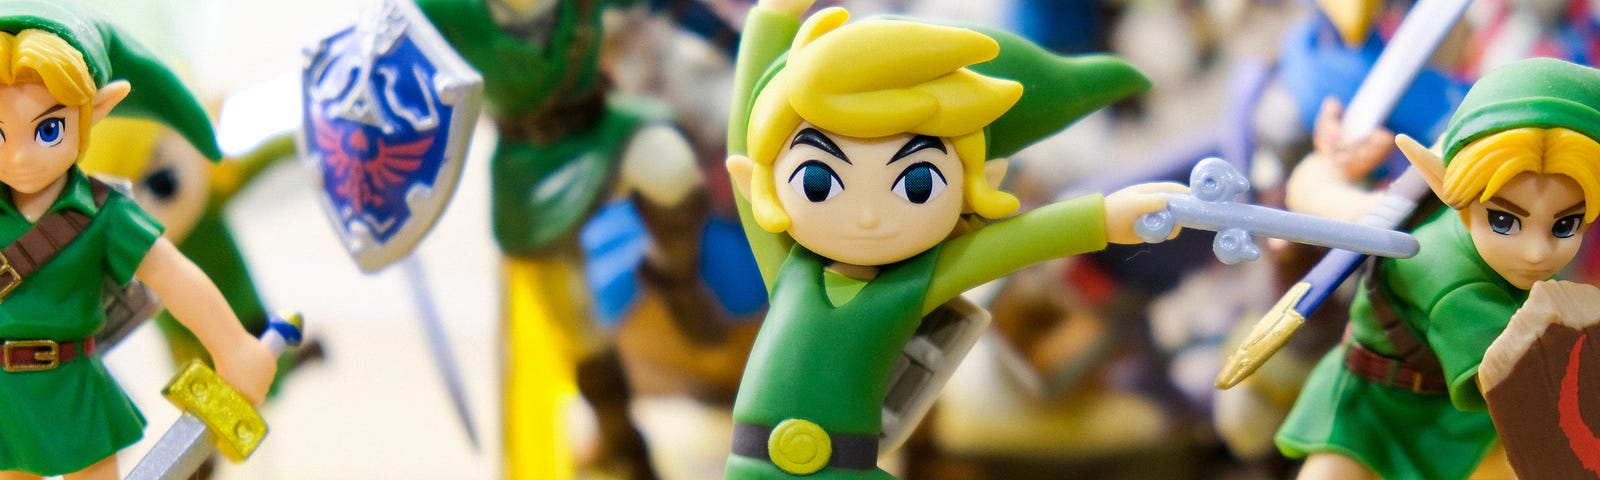 Mini figures of Link from Zelda waving their swords or standing ready to battle.